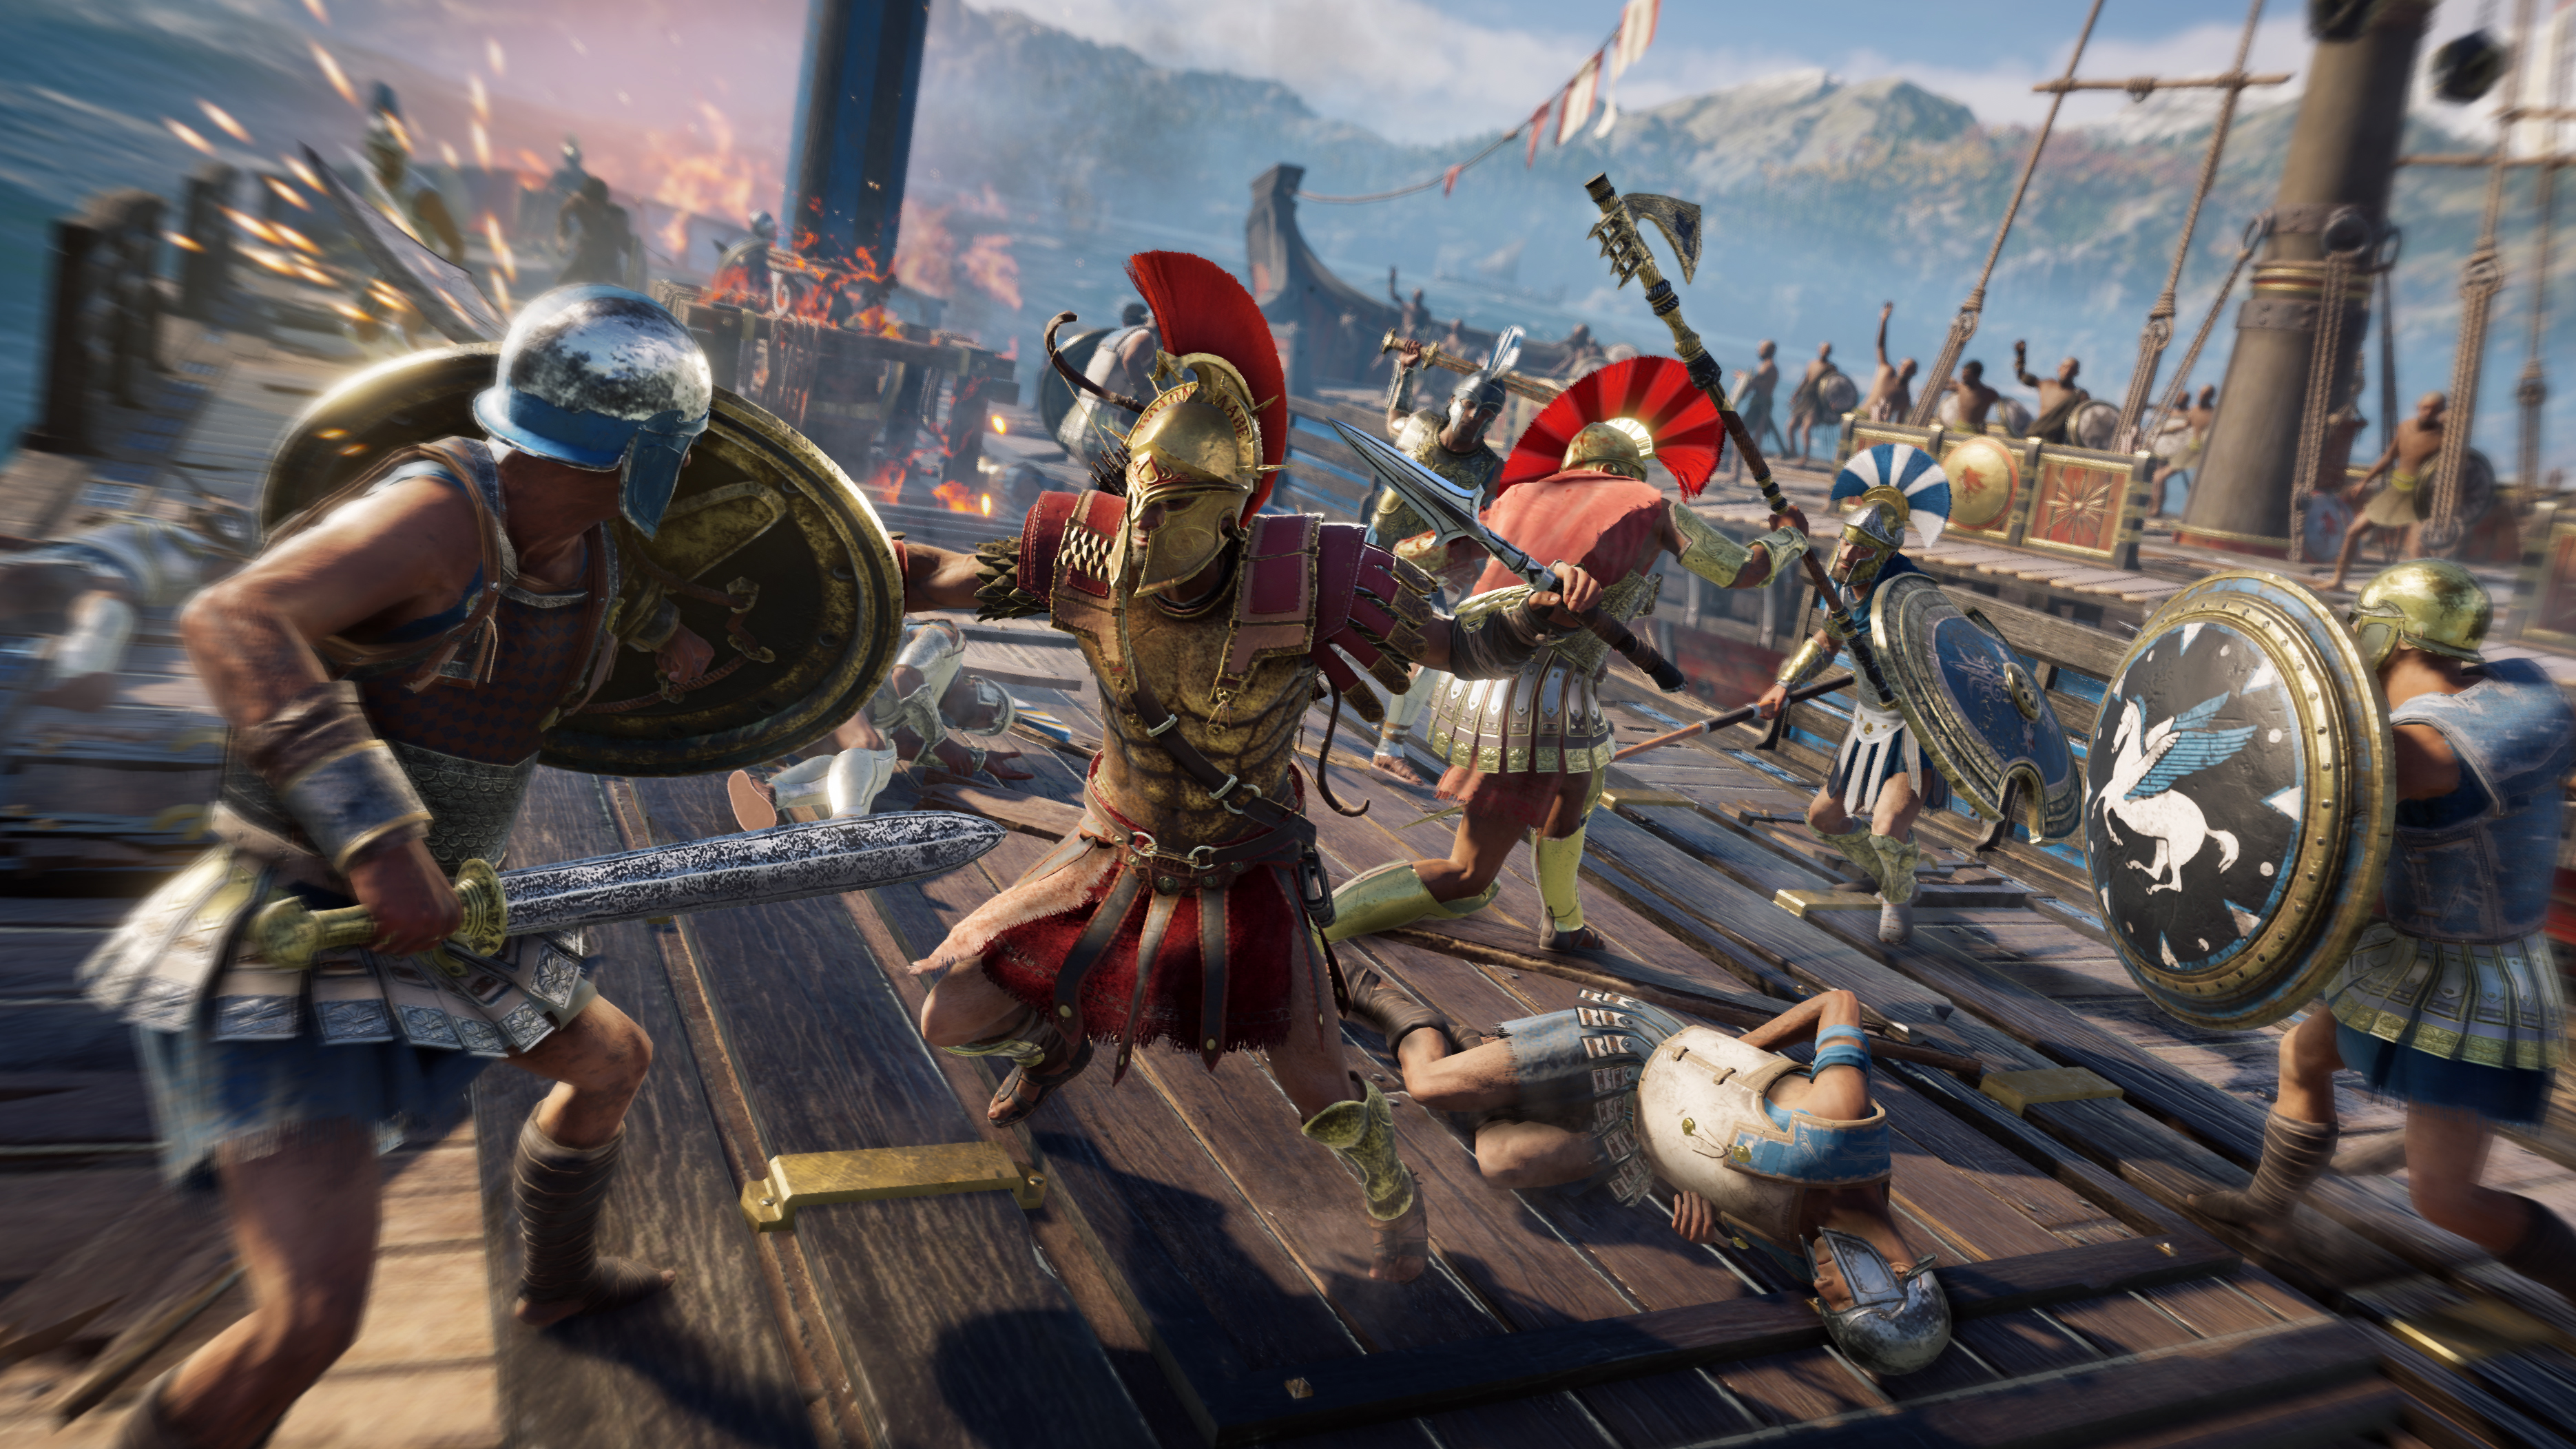 Best single player PC games: Assassin’s Creed: Odyssey